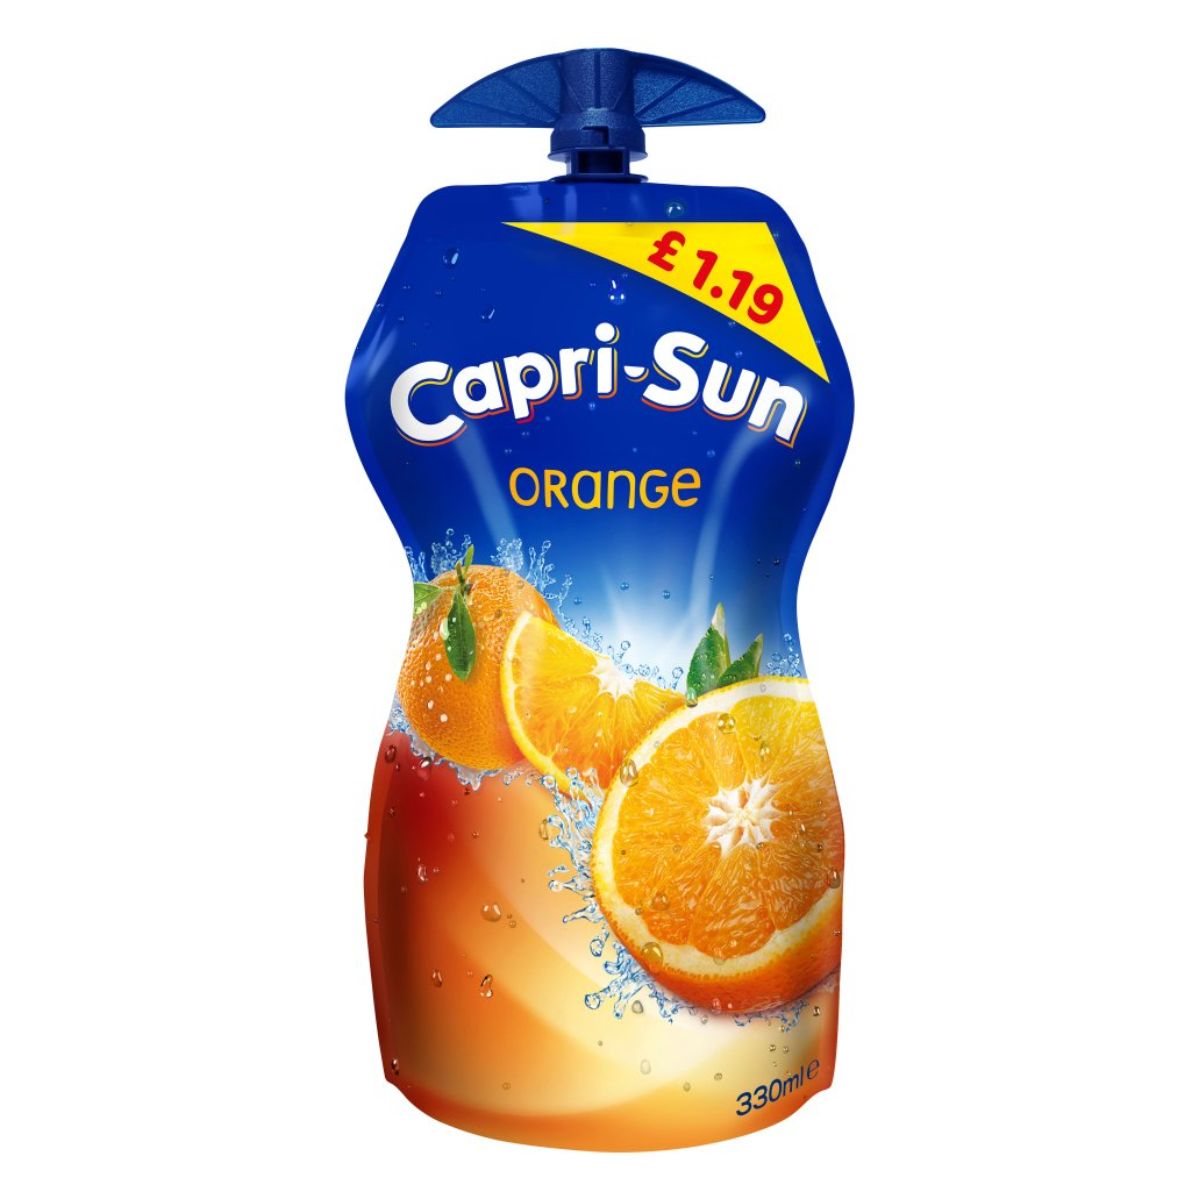 A bottle of Capri Sun - Orange - 330ml featuring a vibrant image of oranges with splashing juice, priced at £1.19, with a blue cap.